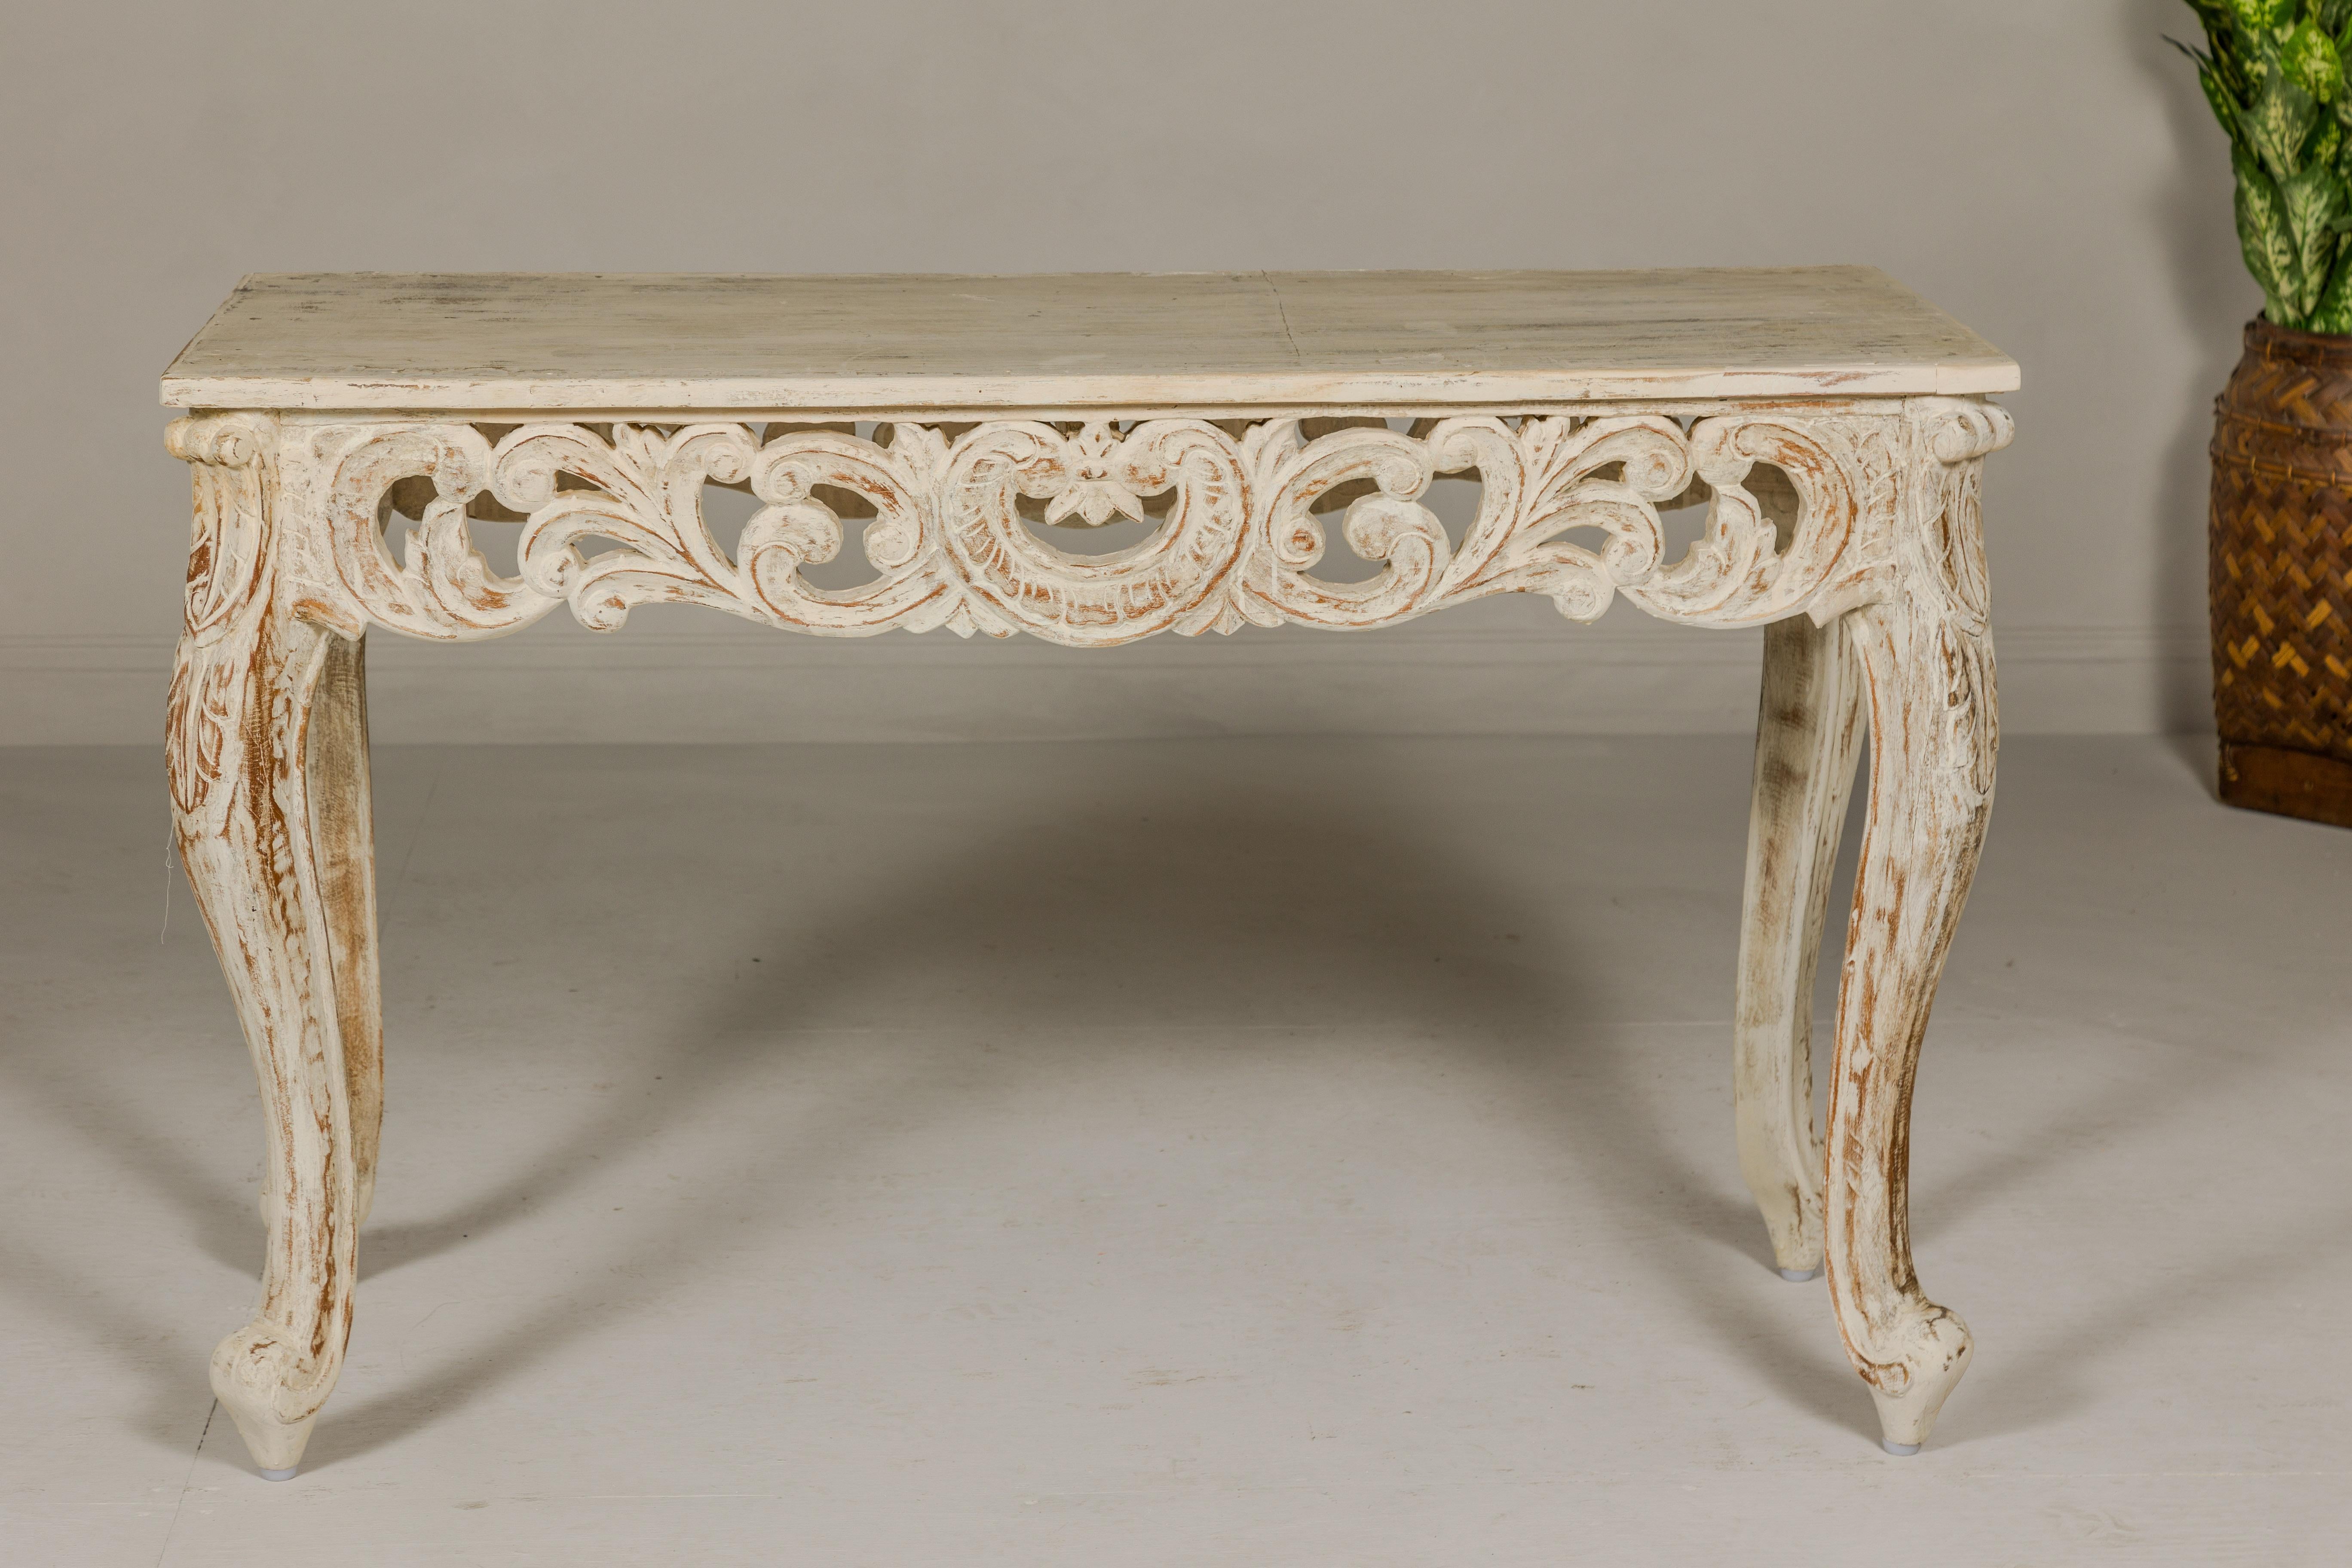 Rococo Style Painted Console Table with Carved Apron and Distressed Finish For Sale 14